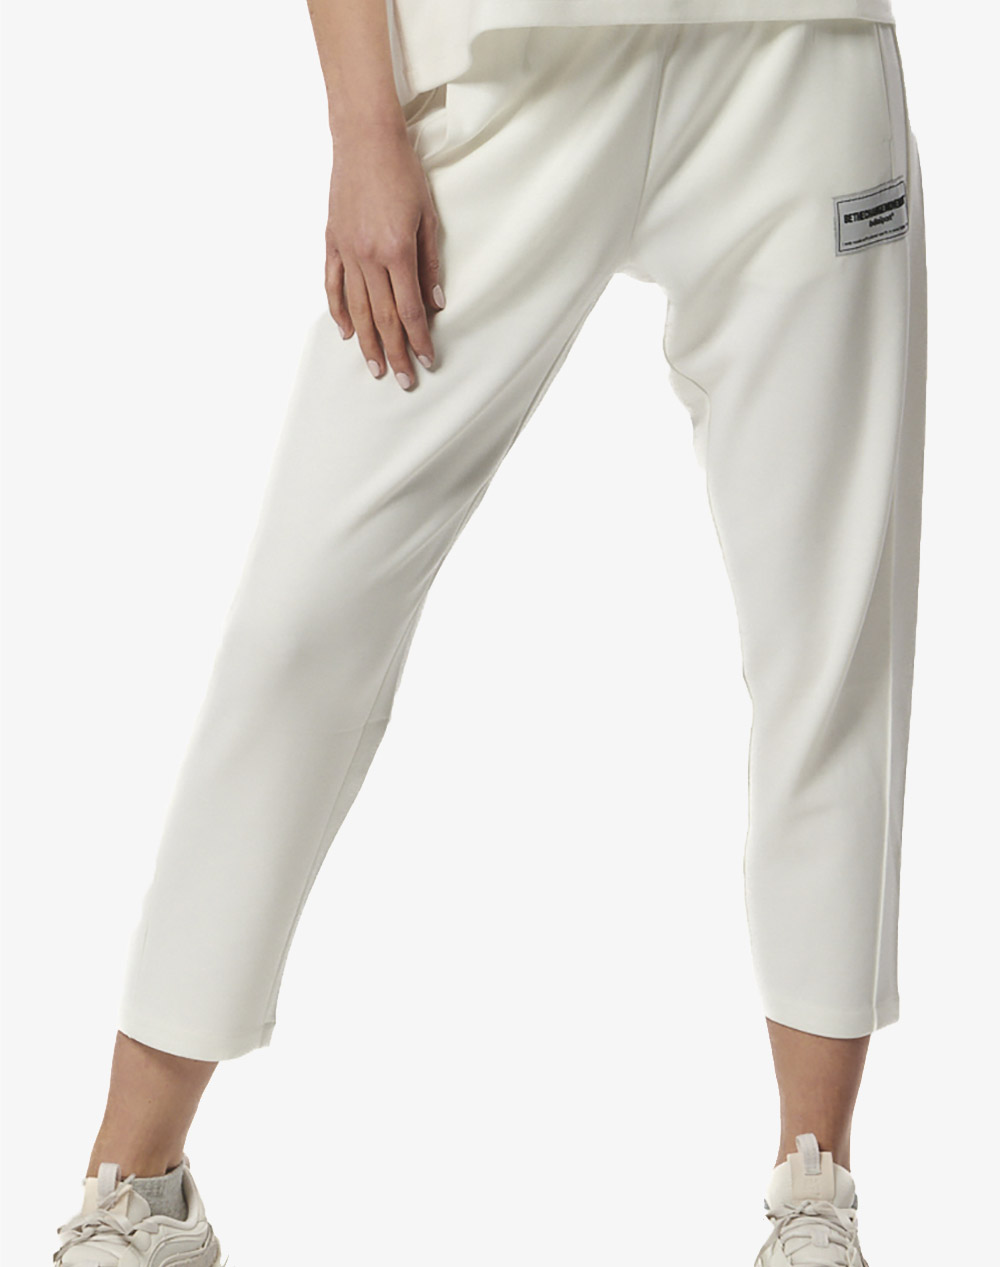 BODY ACTION WOMEN”S TECH FLEECE CROPPED TRACK PANTS 021433-01-STAR WHITE OffWhite 3810PBODY2040051_XR30945